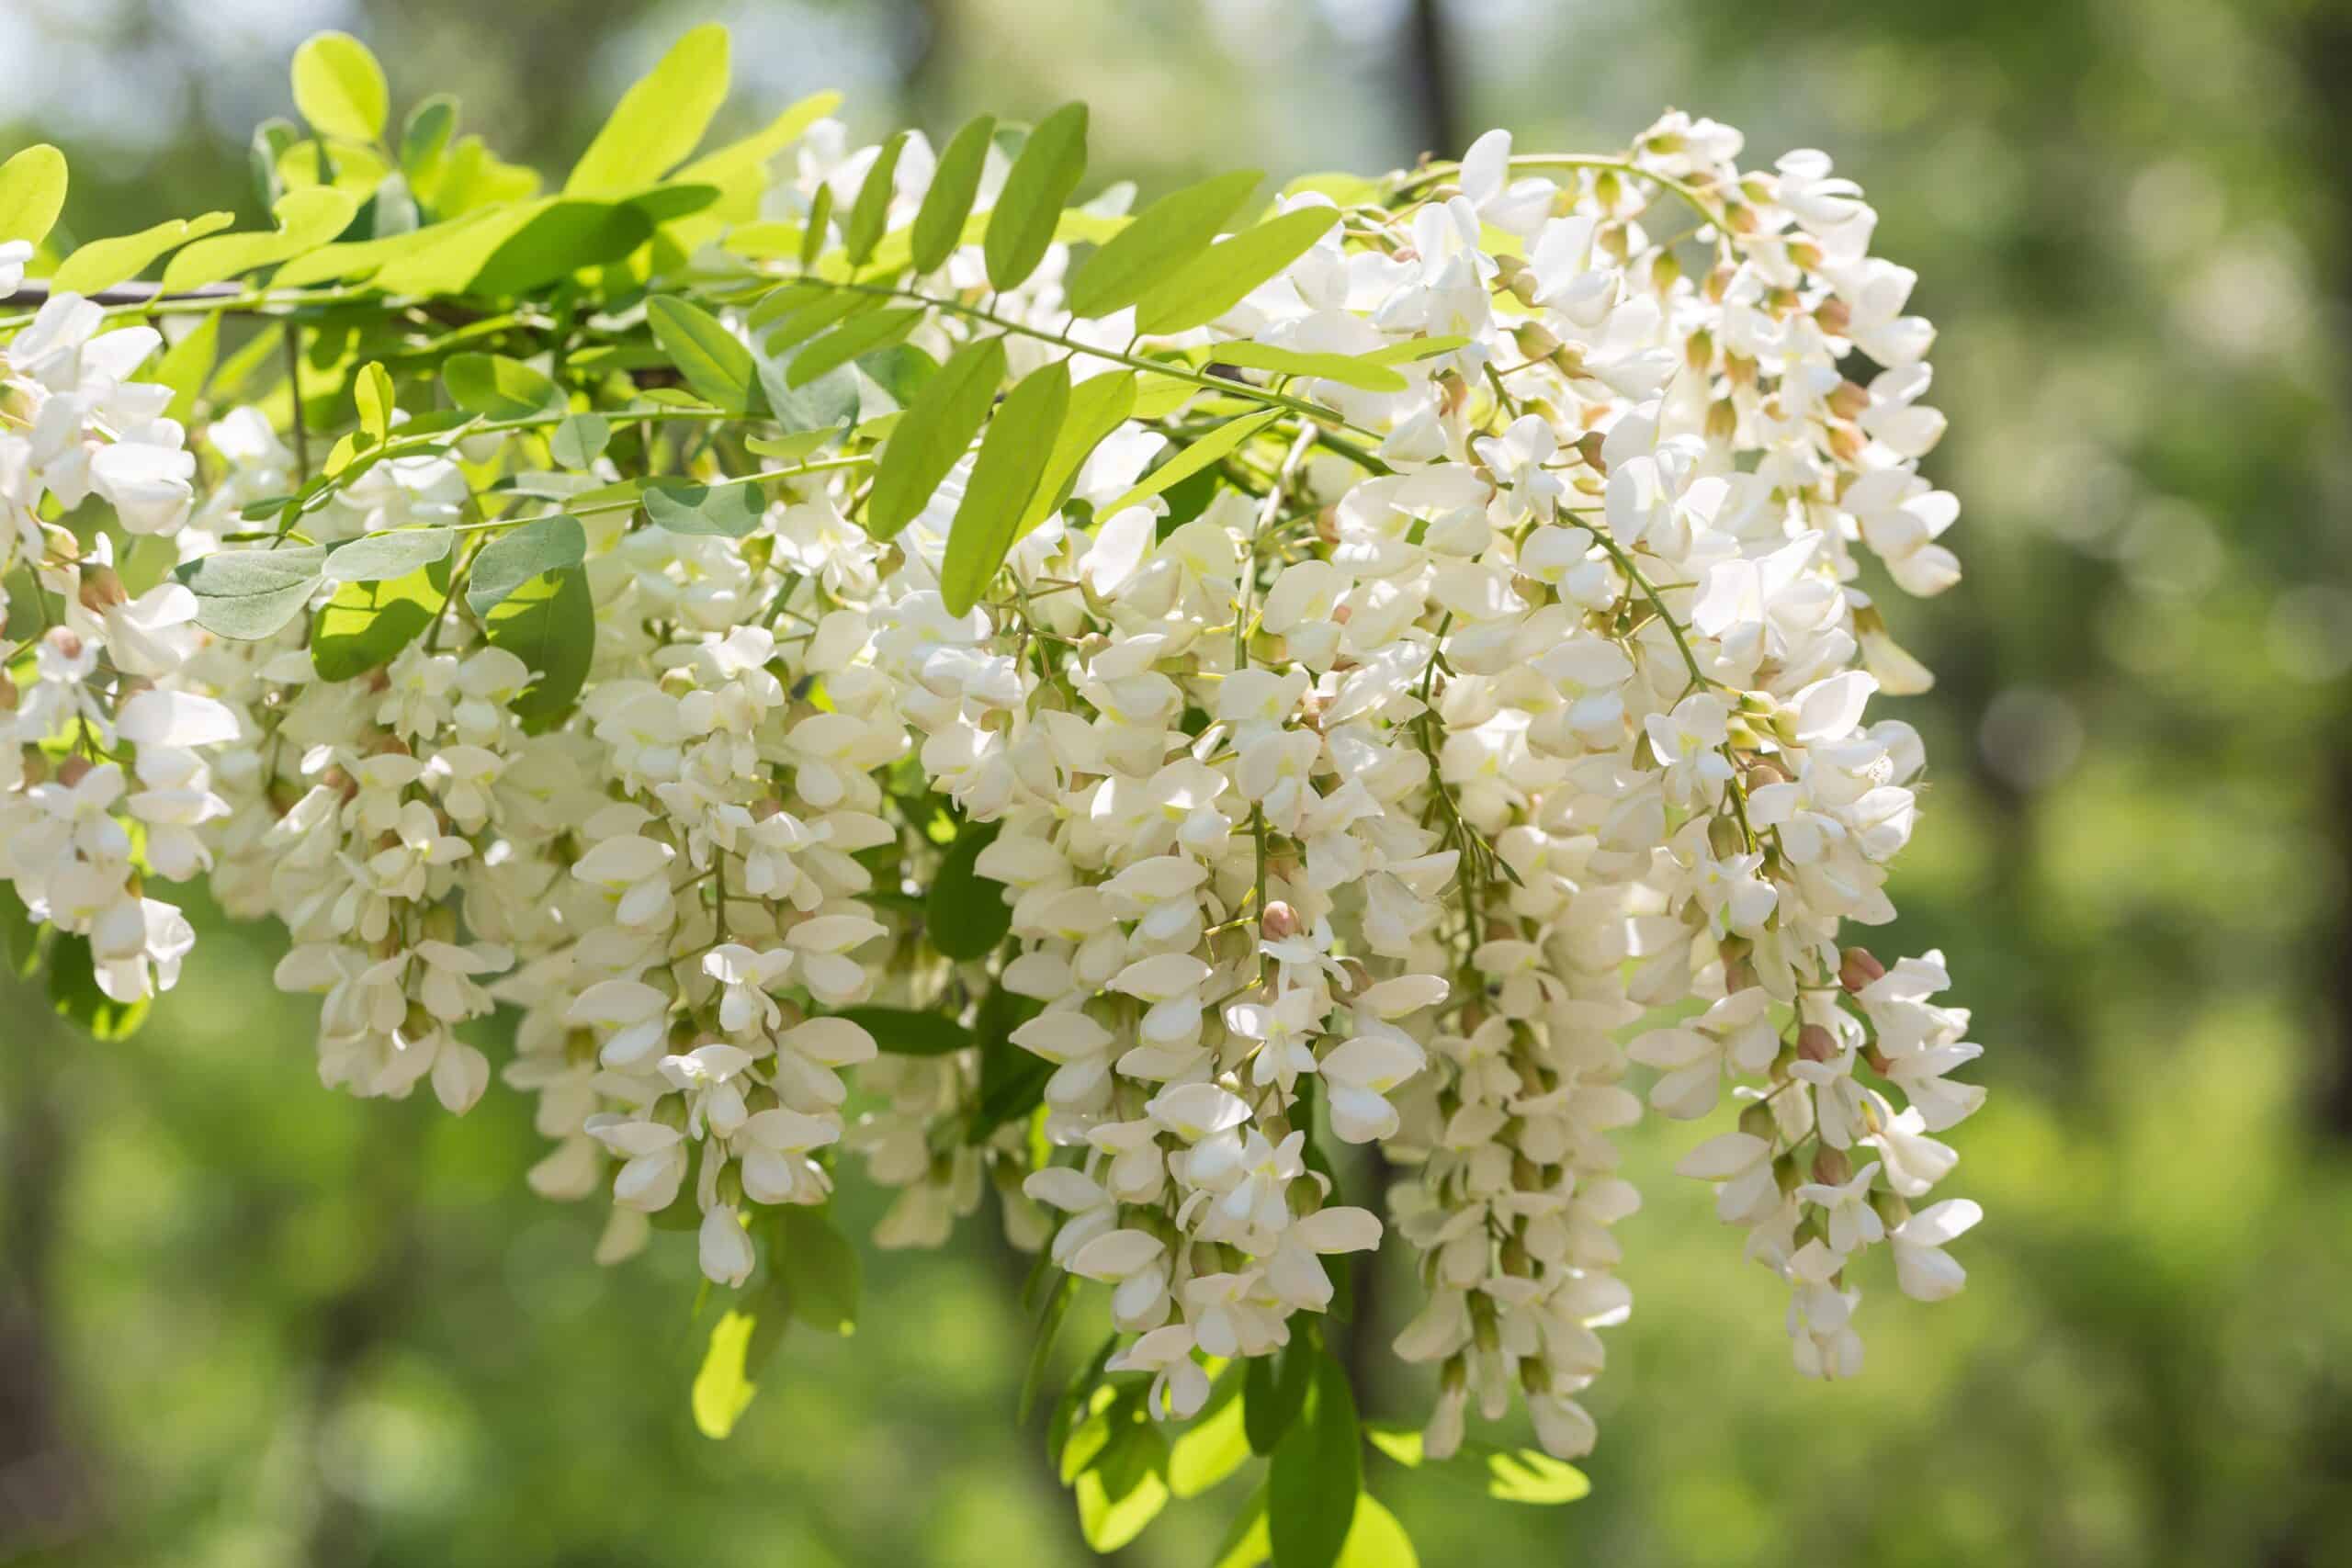 Flowers of the Japanese string tree